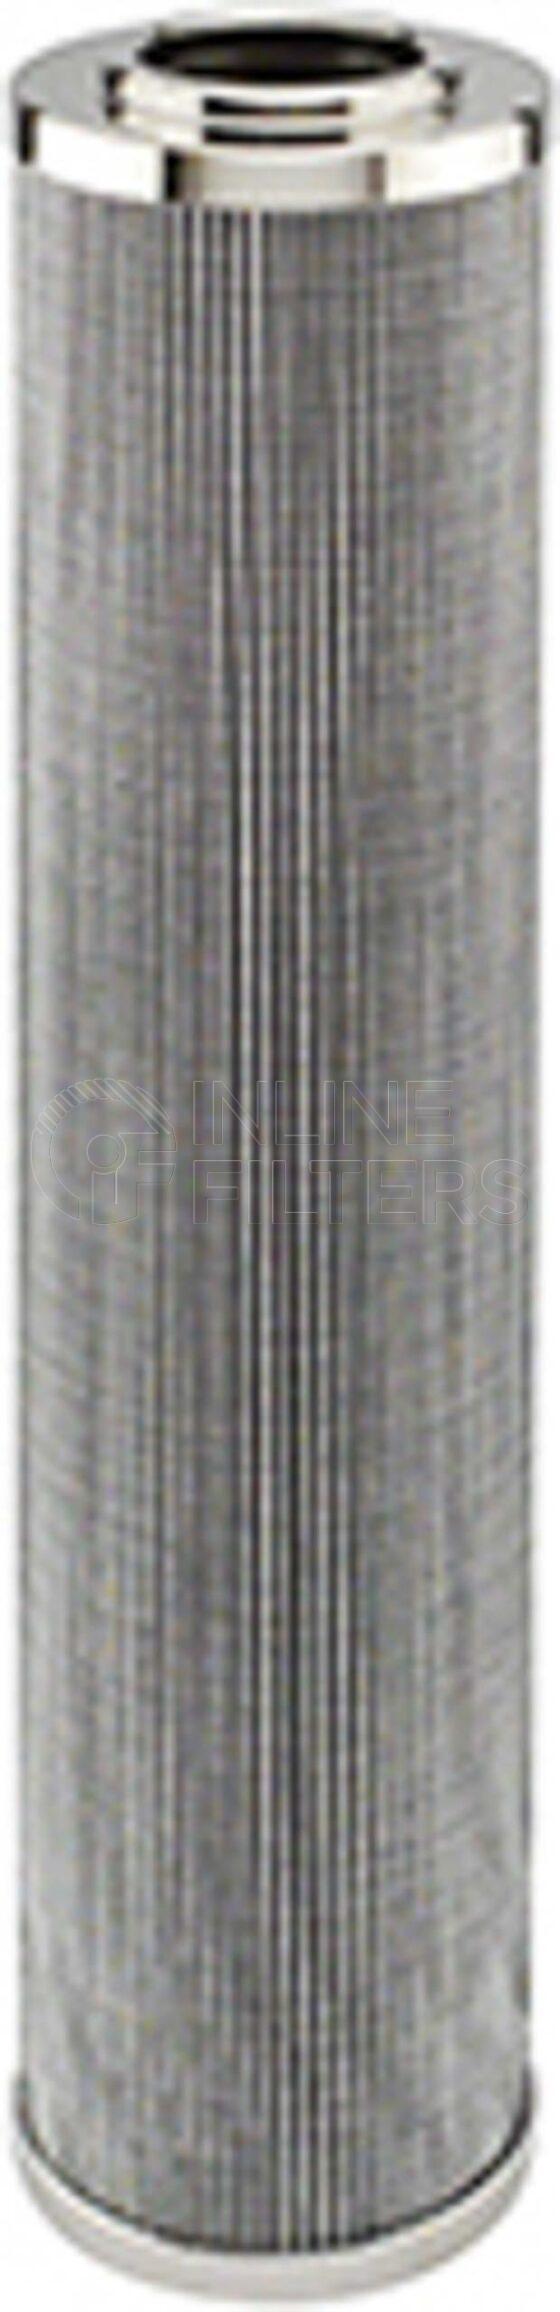 Inline FH52582. Hydraulic Filter Product – Cartridge – O- Ring Product Hydraulic filter product